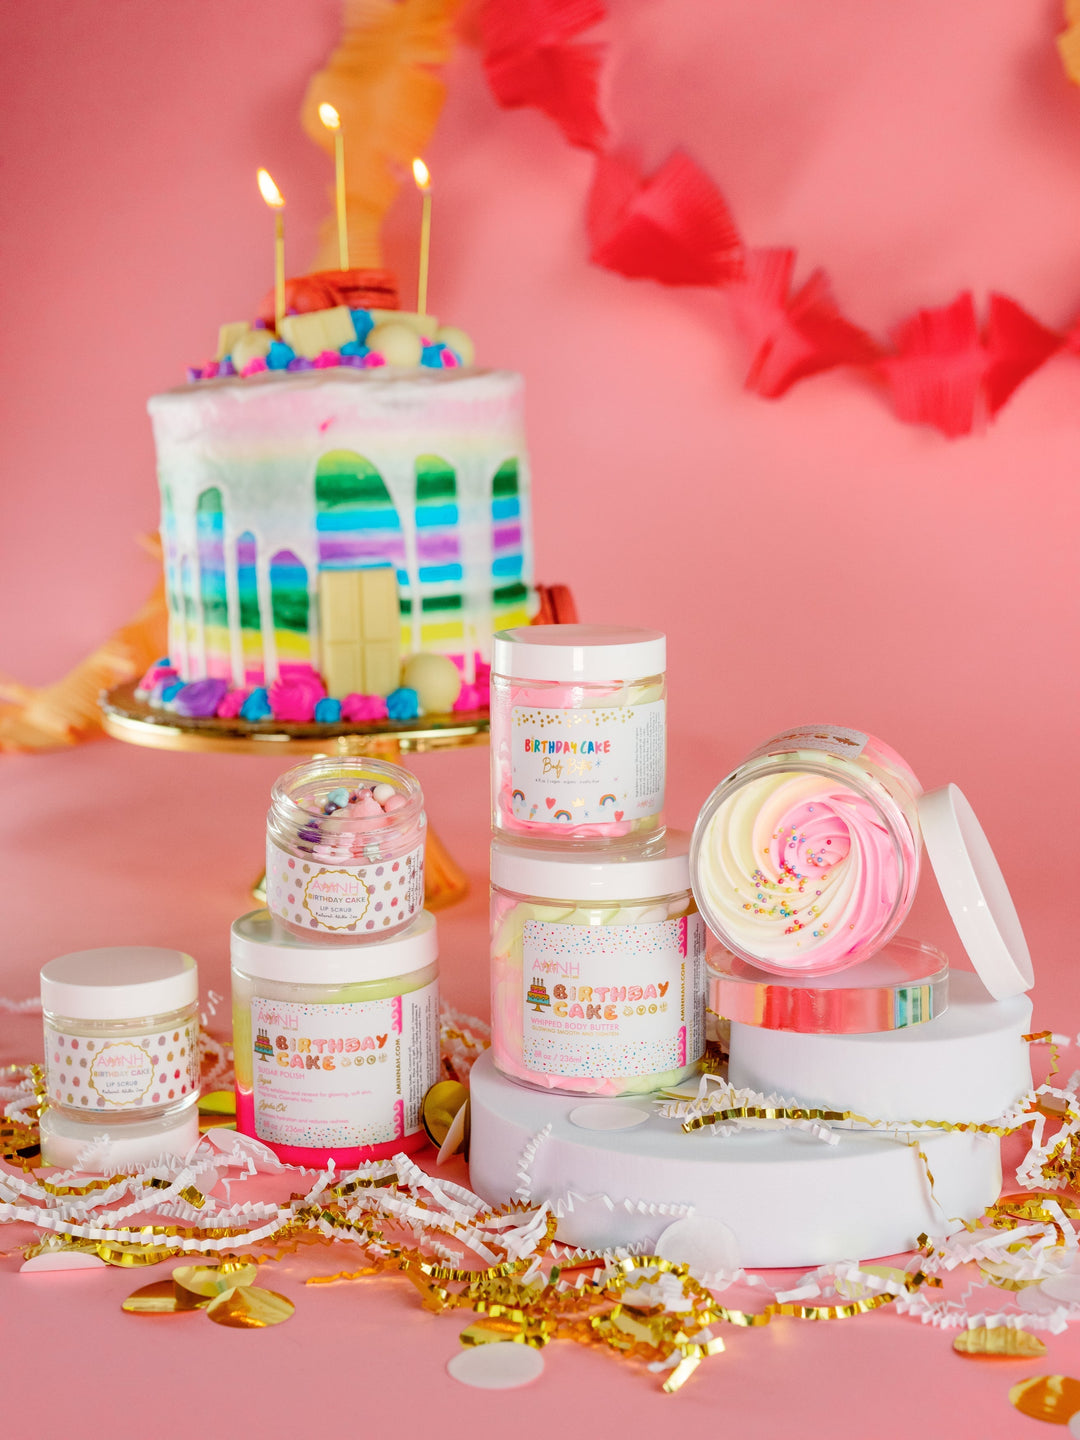 "Life of the Party" Birthday Cake Collection | Body Butter| Foaming Soap| Sugar Scrub| AMINNAH 